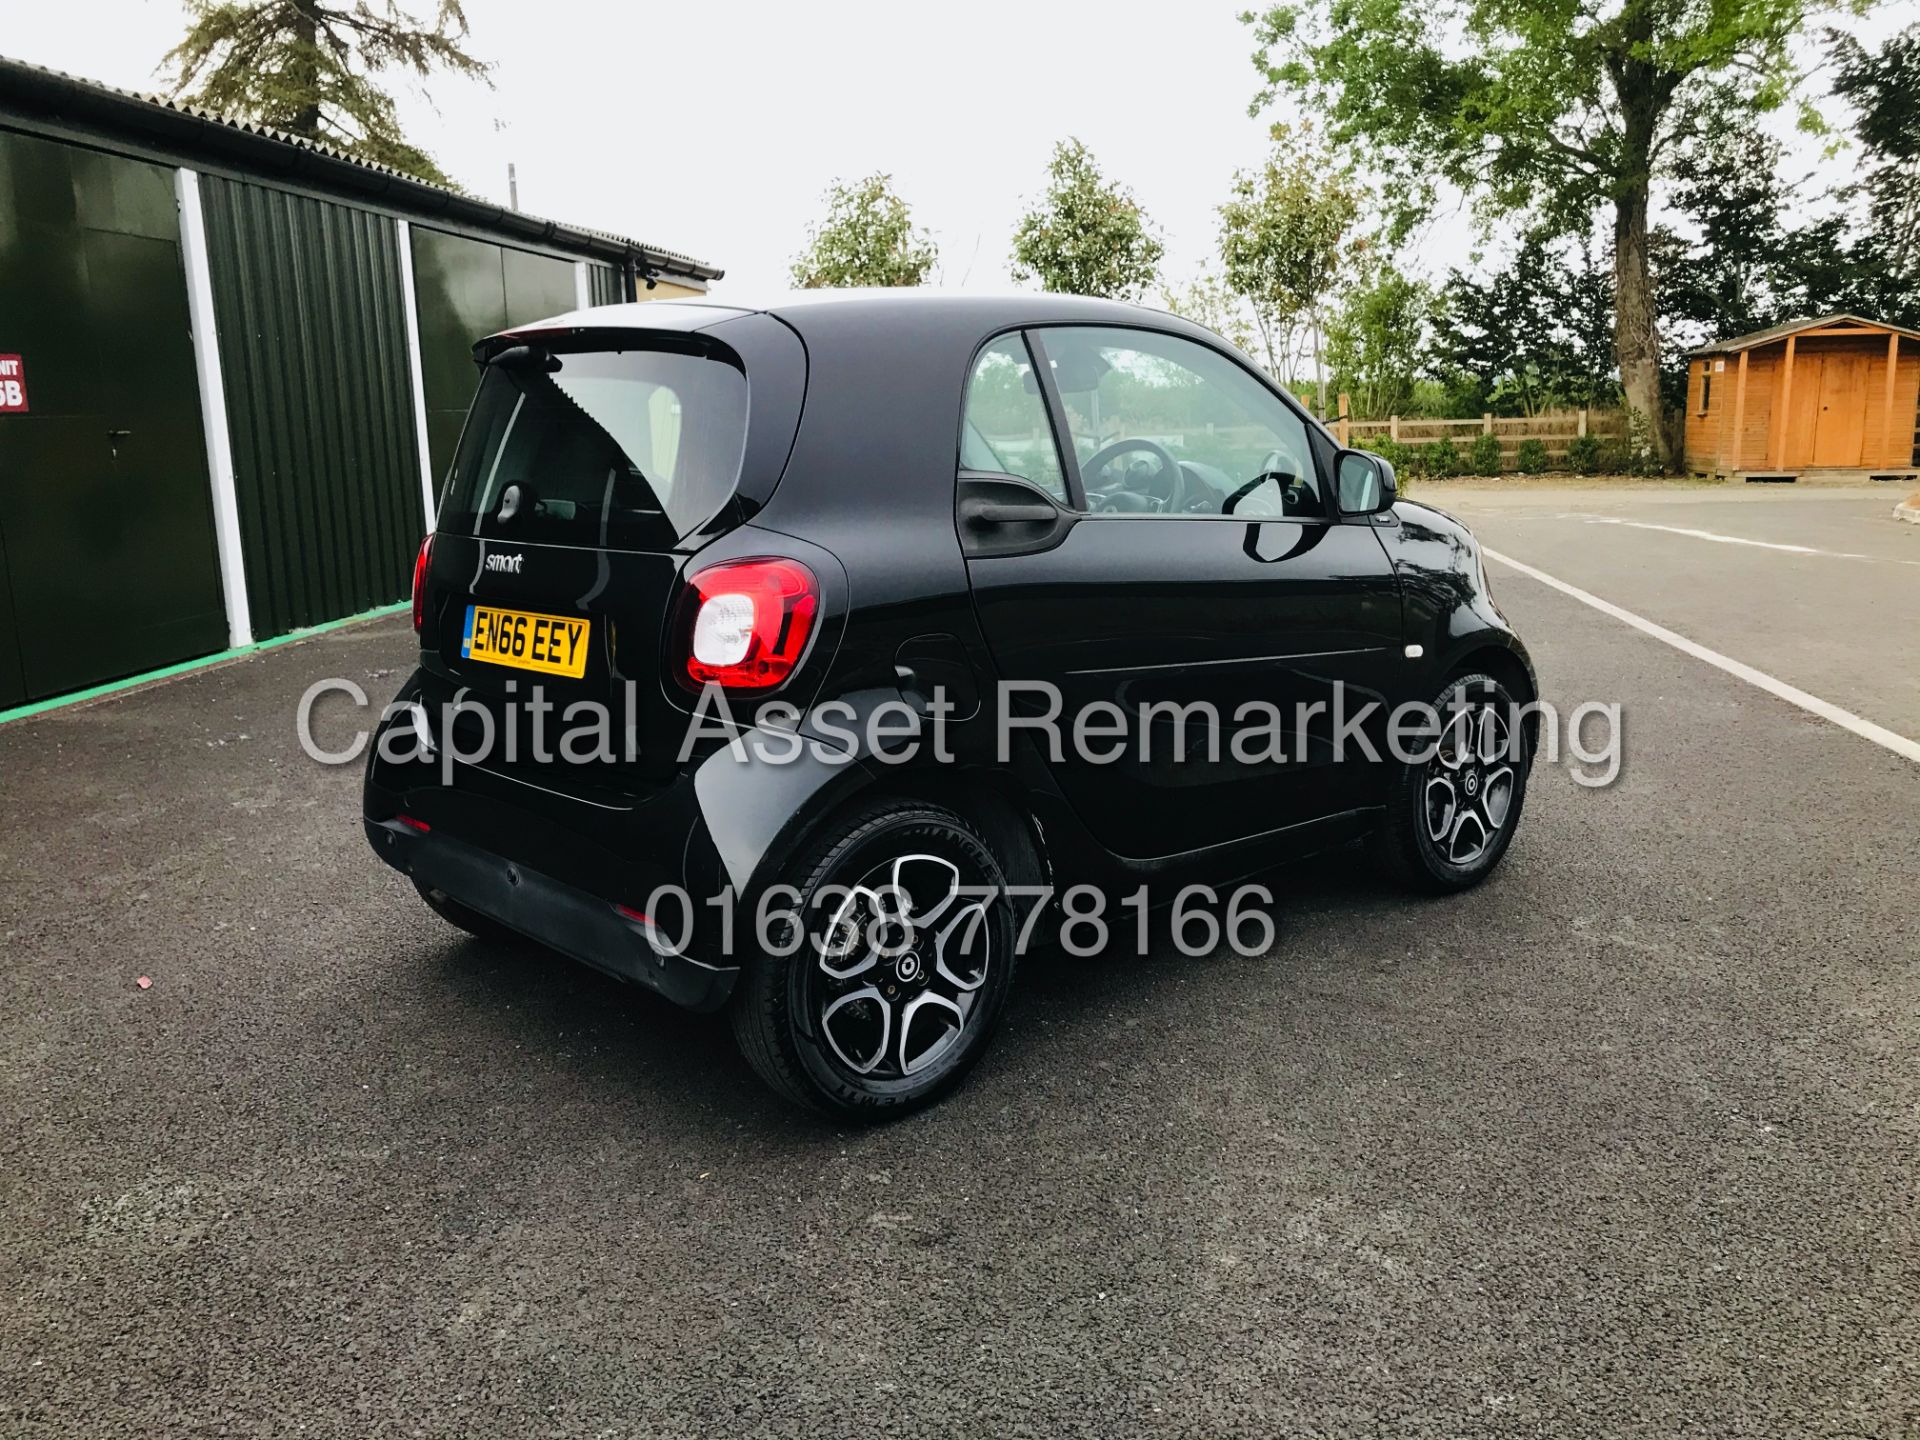 (ON SALE) SMART FORTWO PRIME "PREMIUM EDITION" 2017 REG - 1 KEEPER - LEATHER - PAN ROOF - HUGE SPEC - Image 7 of 20